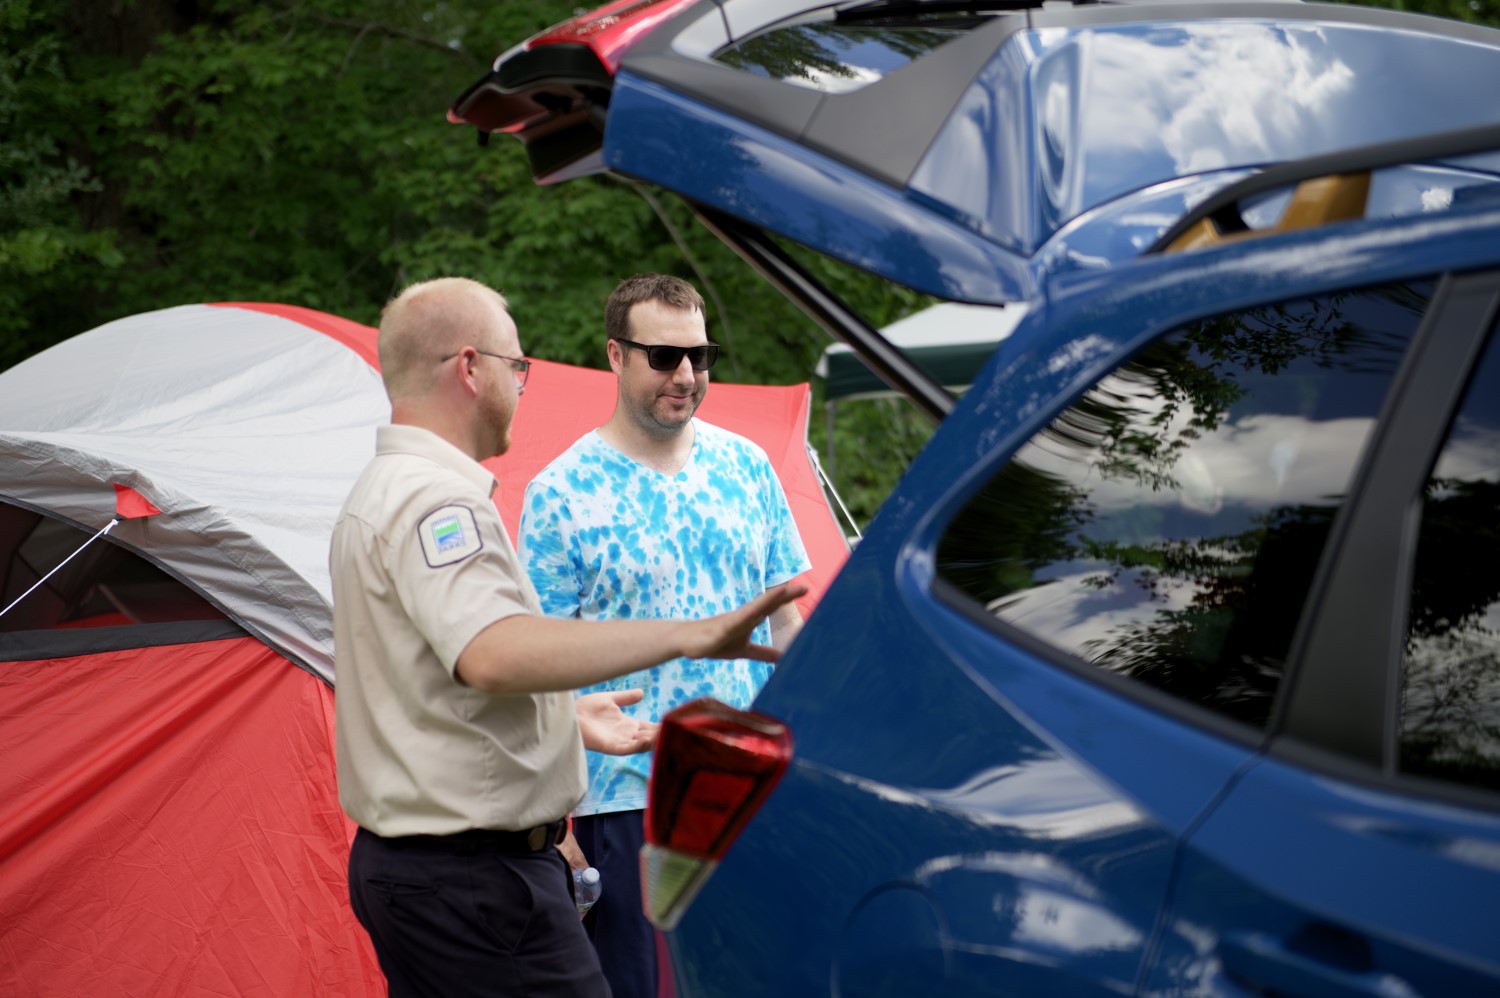 A staff person helping a camper load their car